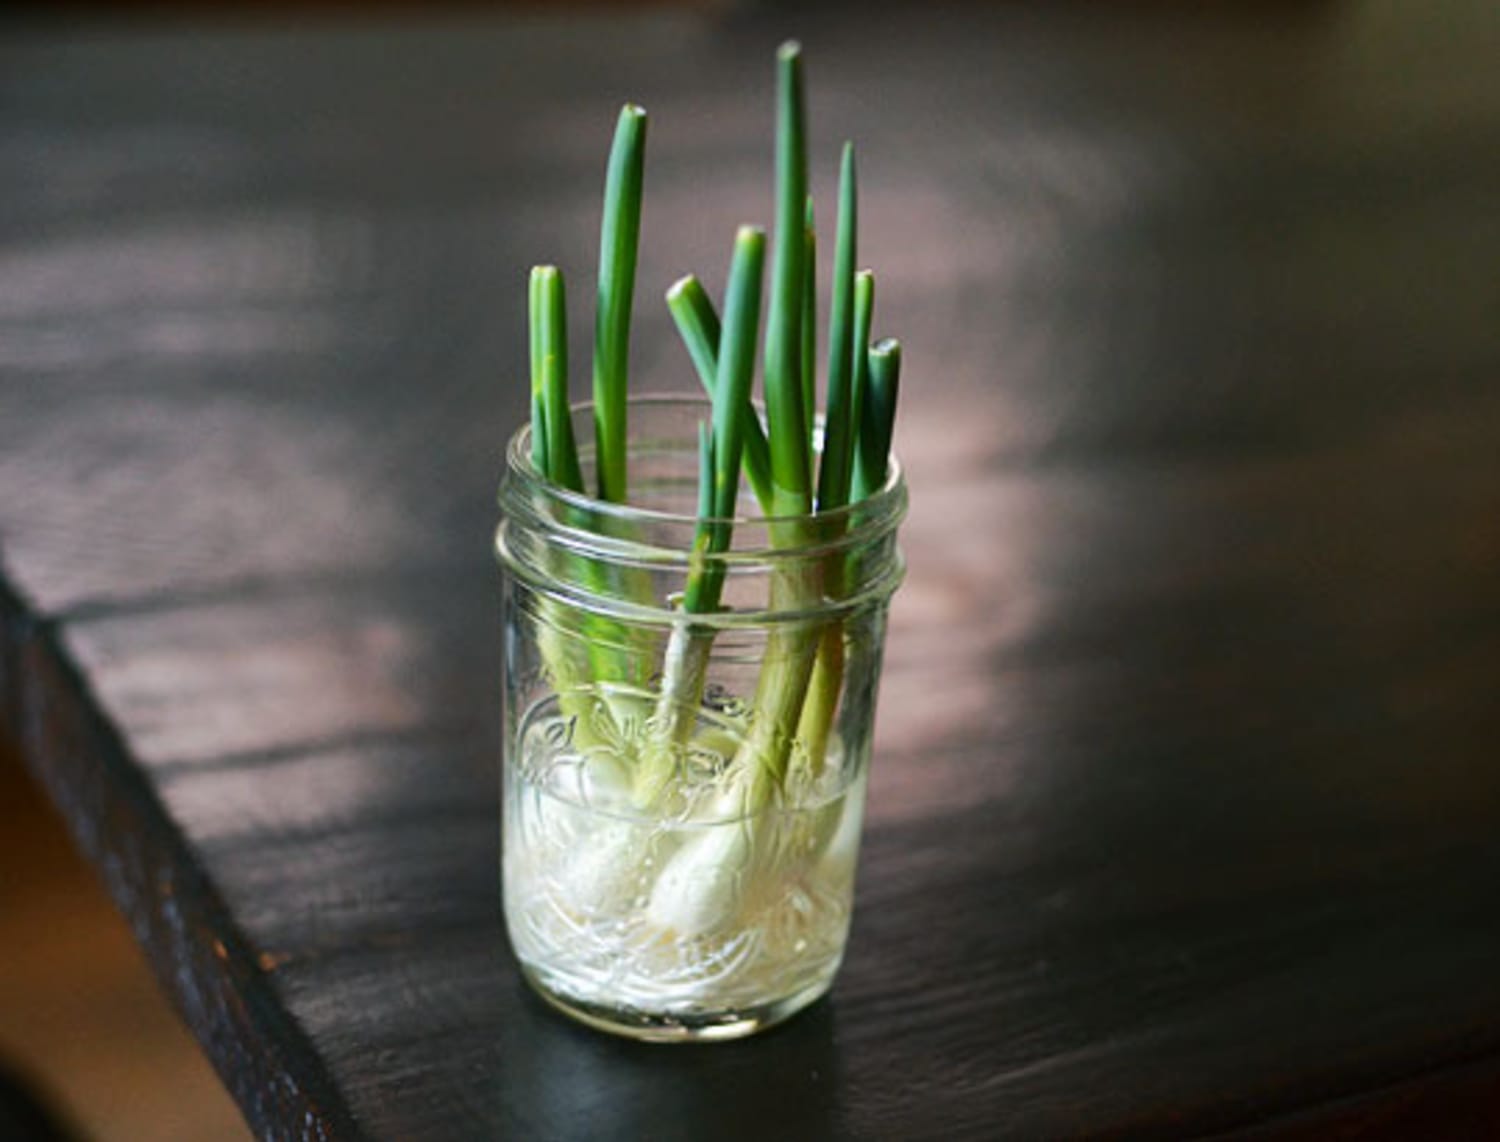 14 Foods You Can Re-Grow from Common Kitchen Scraps